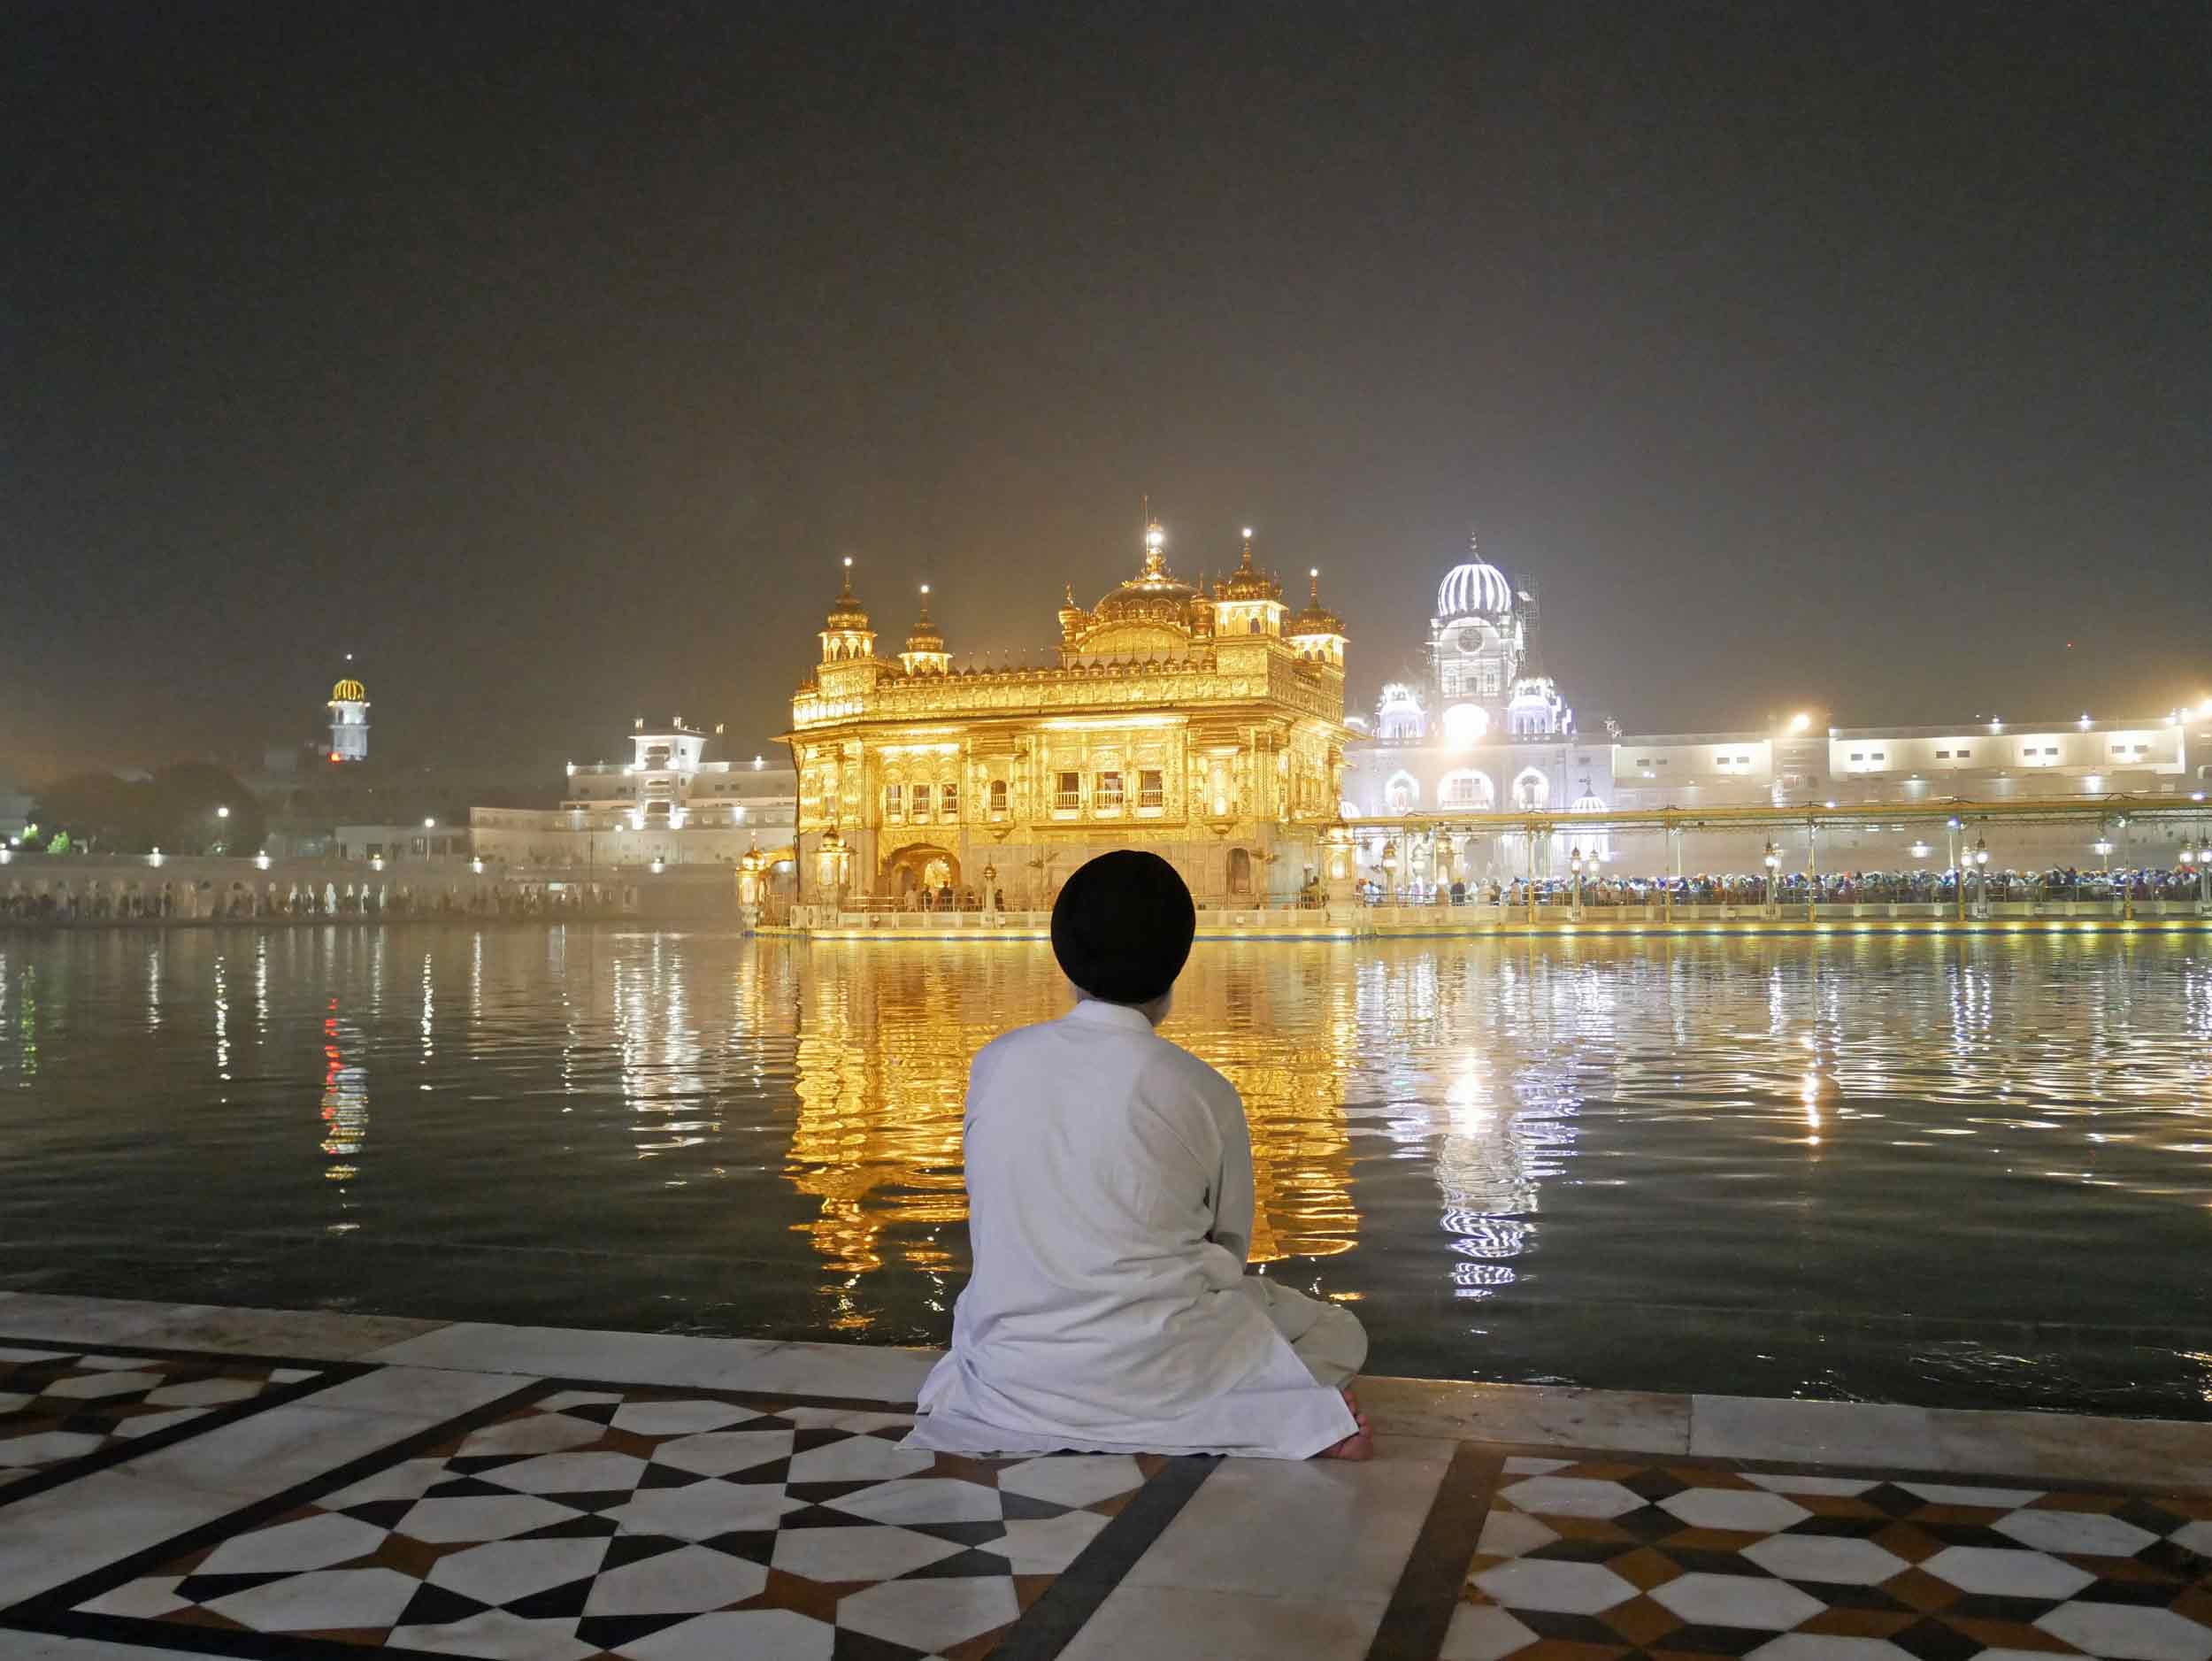  The Golden Temple, resplendent in its evening glow, seemingly floats atop the holy waters that surround the sacred inner-sanctum. 